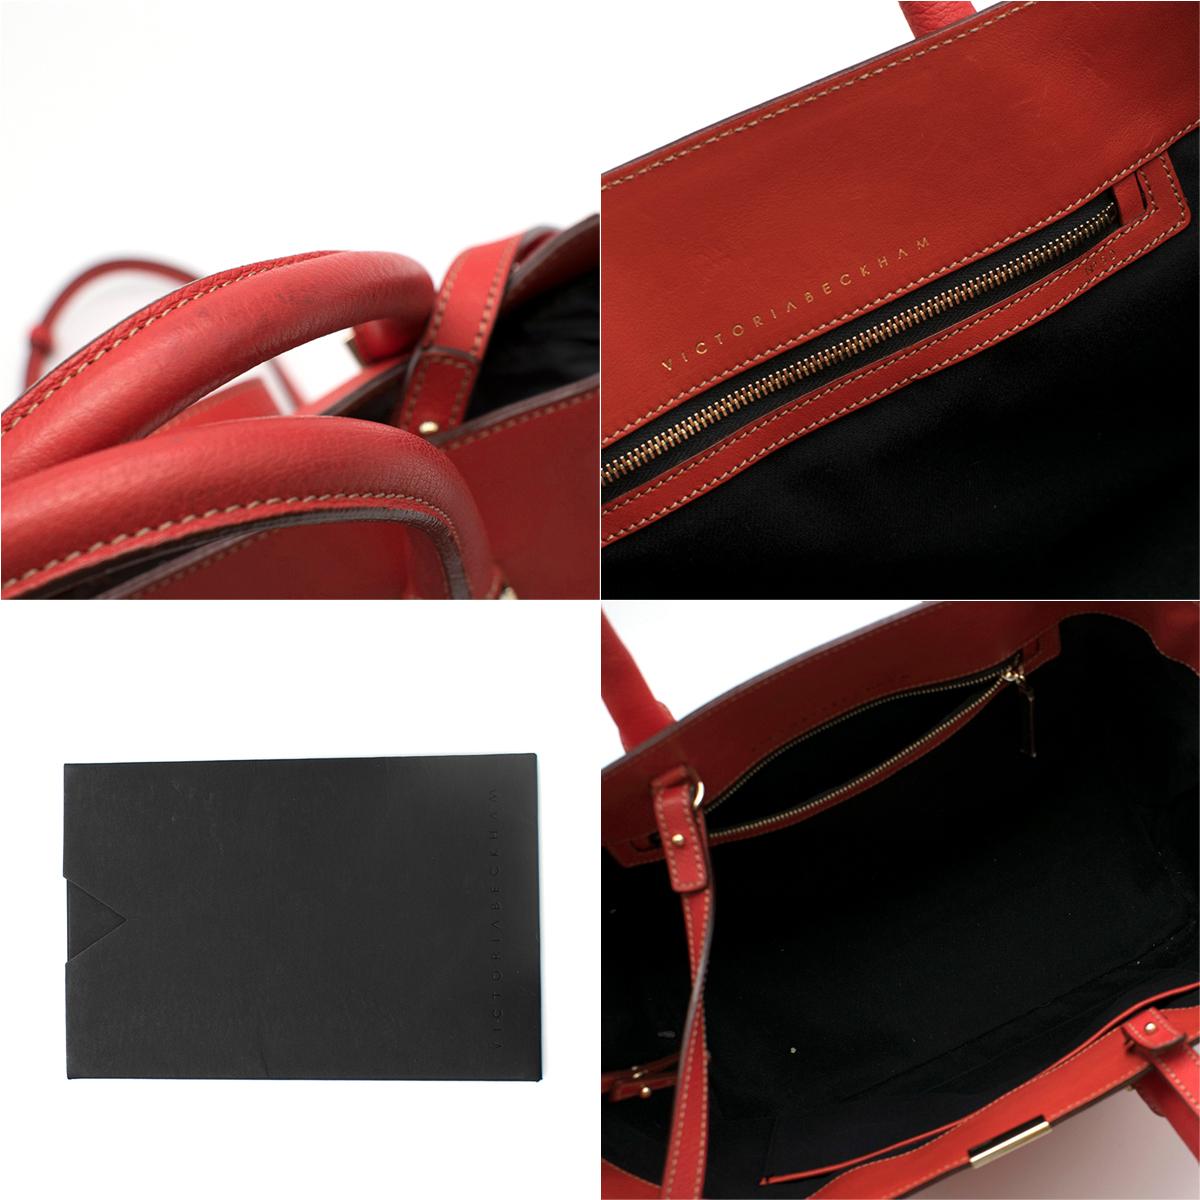 Victoria Beckham Red Liberty Leather Tote bag   6